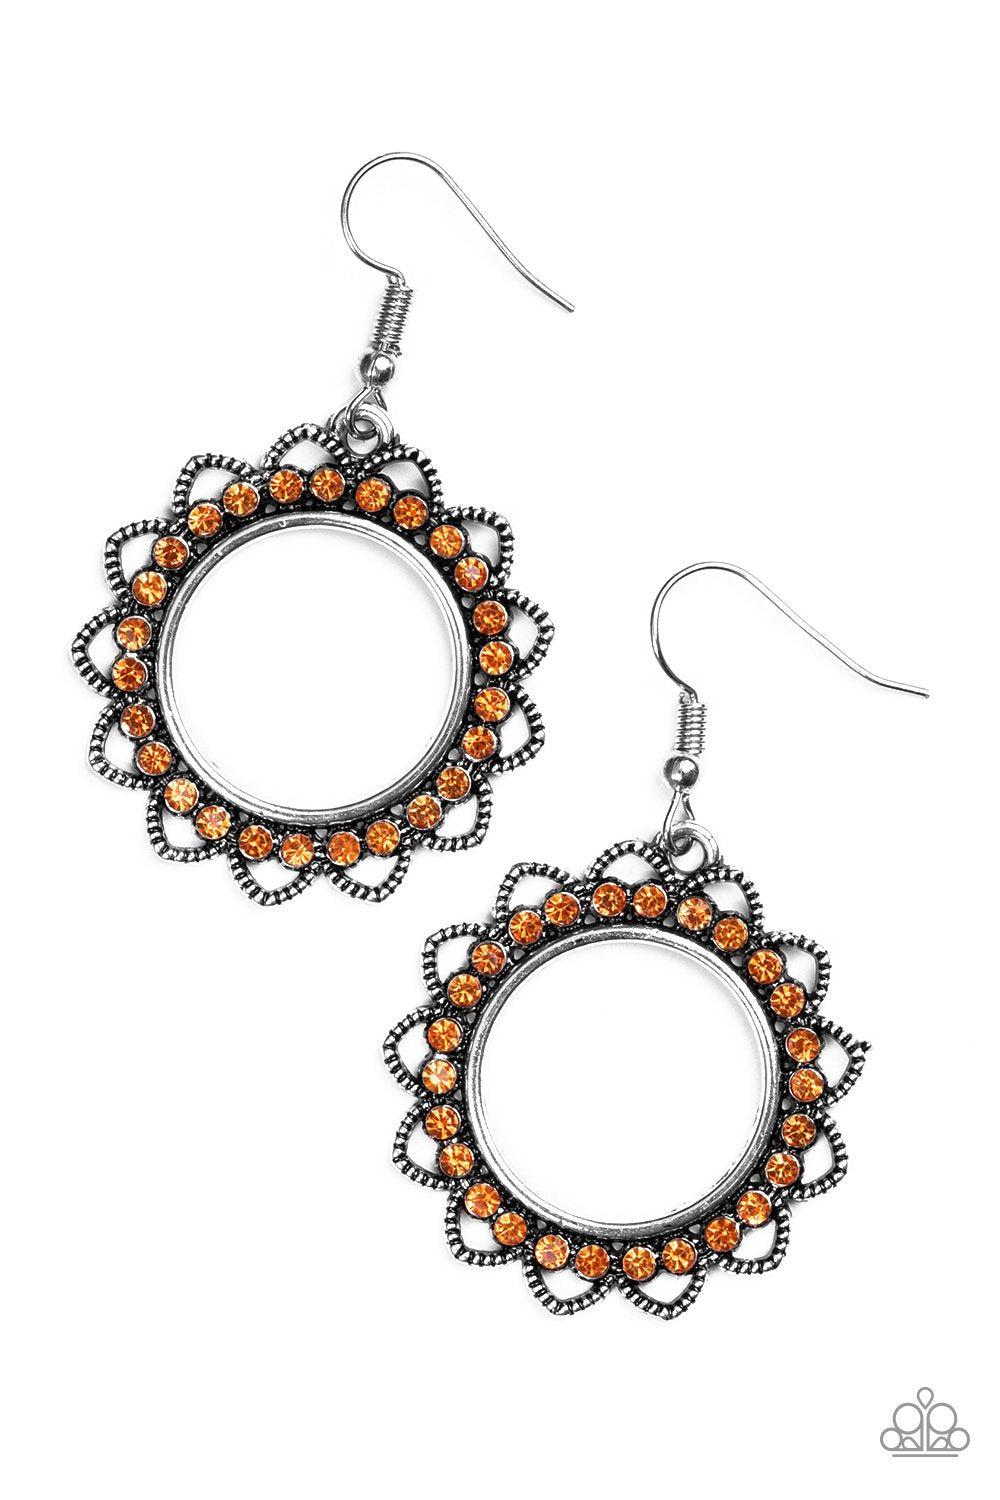 Bring Your Tambourine Orange Earrings - Paparazzi Accessories-CarasShop.com - $5 Jewelry by Cara Jewels